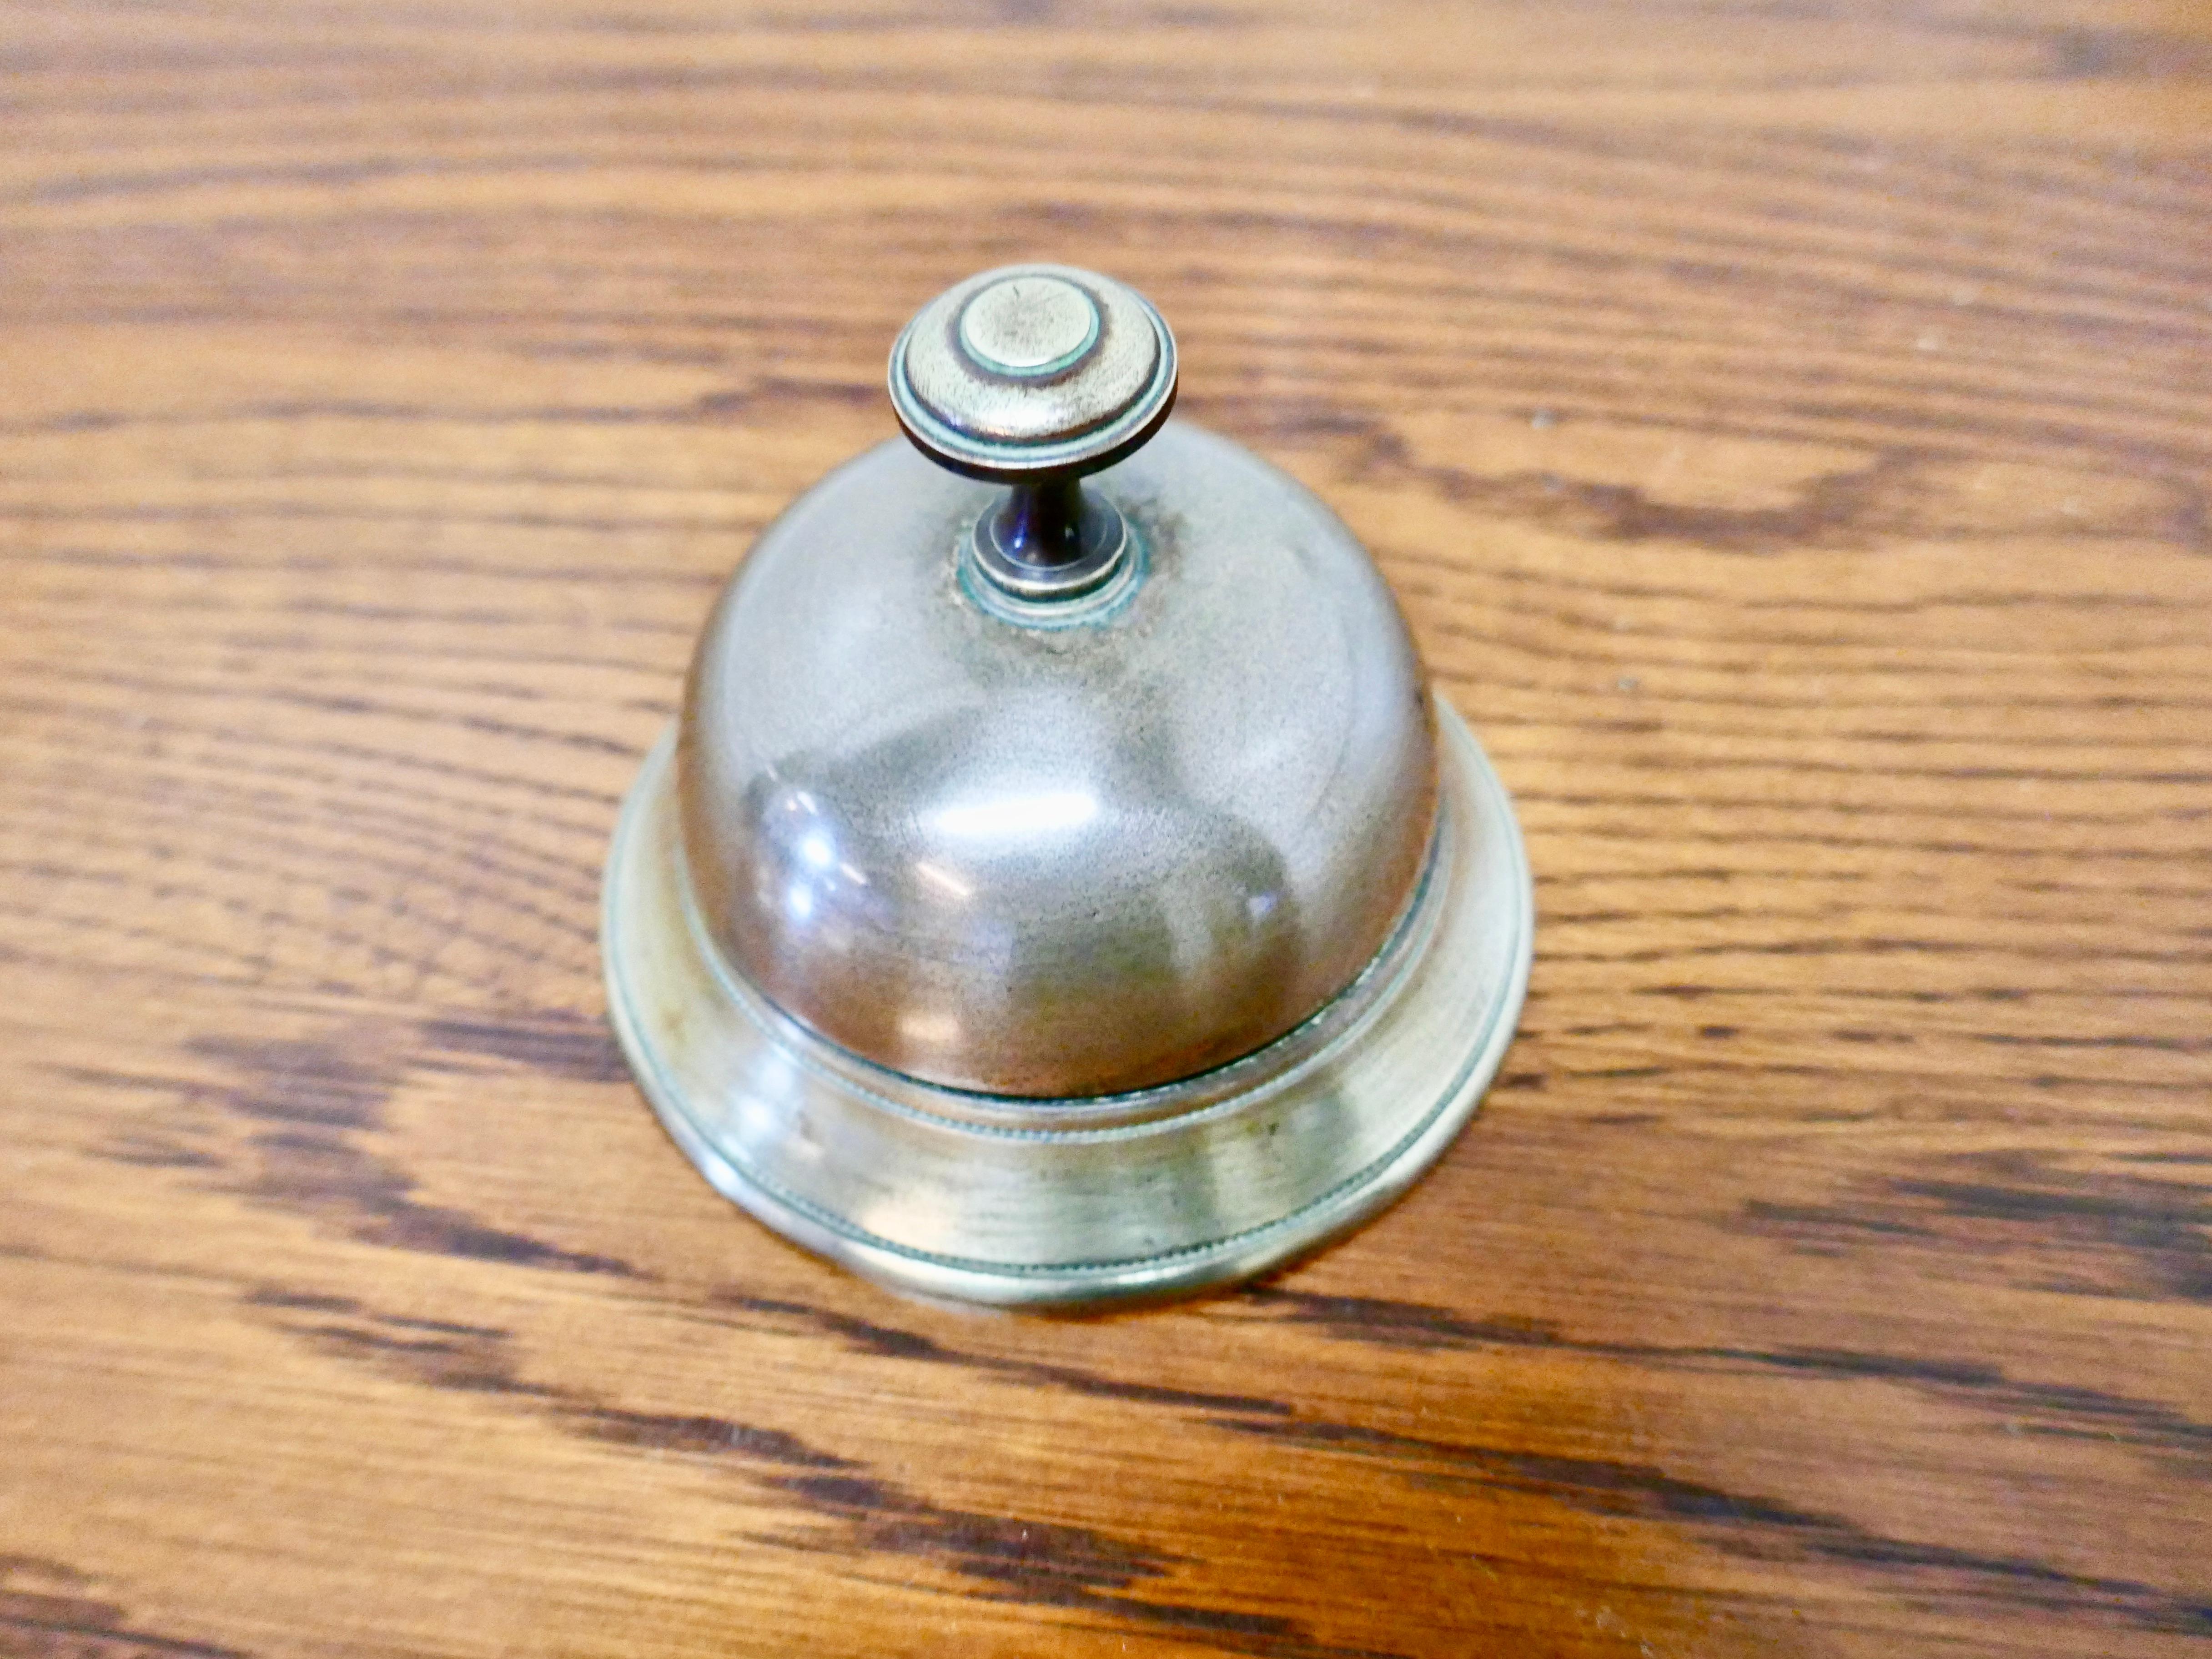 Victorian brass courtesy counter top bell, reception desk bell

Made in solid brass, in good read to use with a demanding ding, the bell is 4” in diameter and 4” high 
GB133.